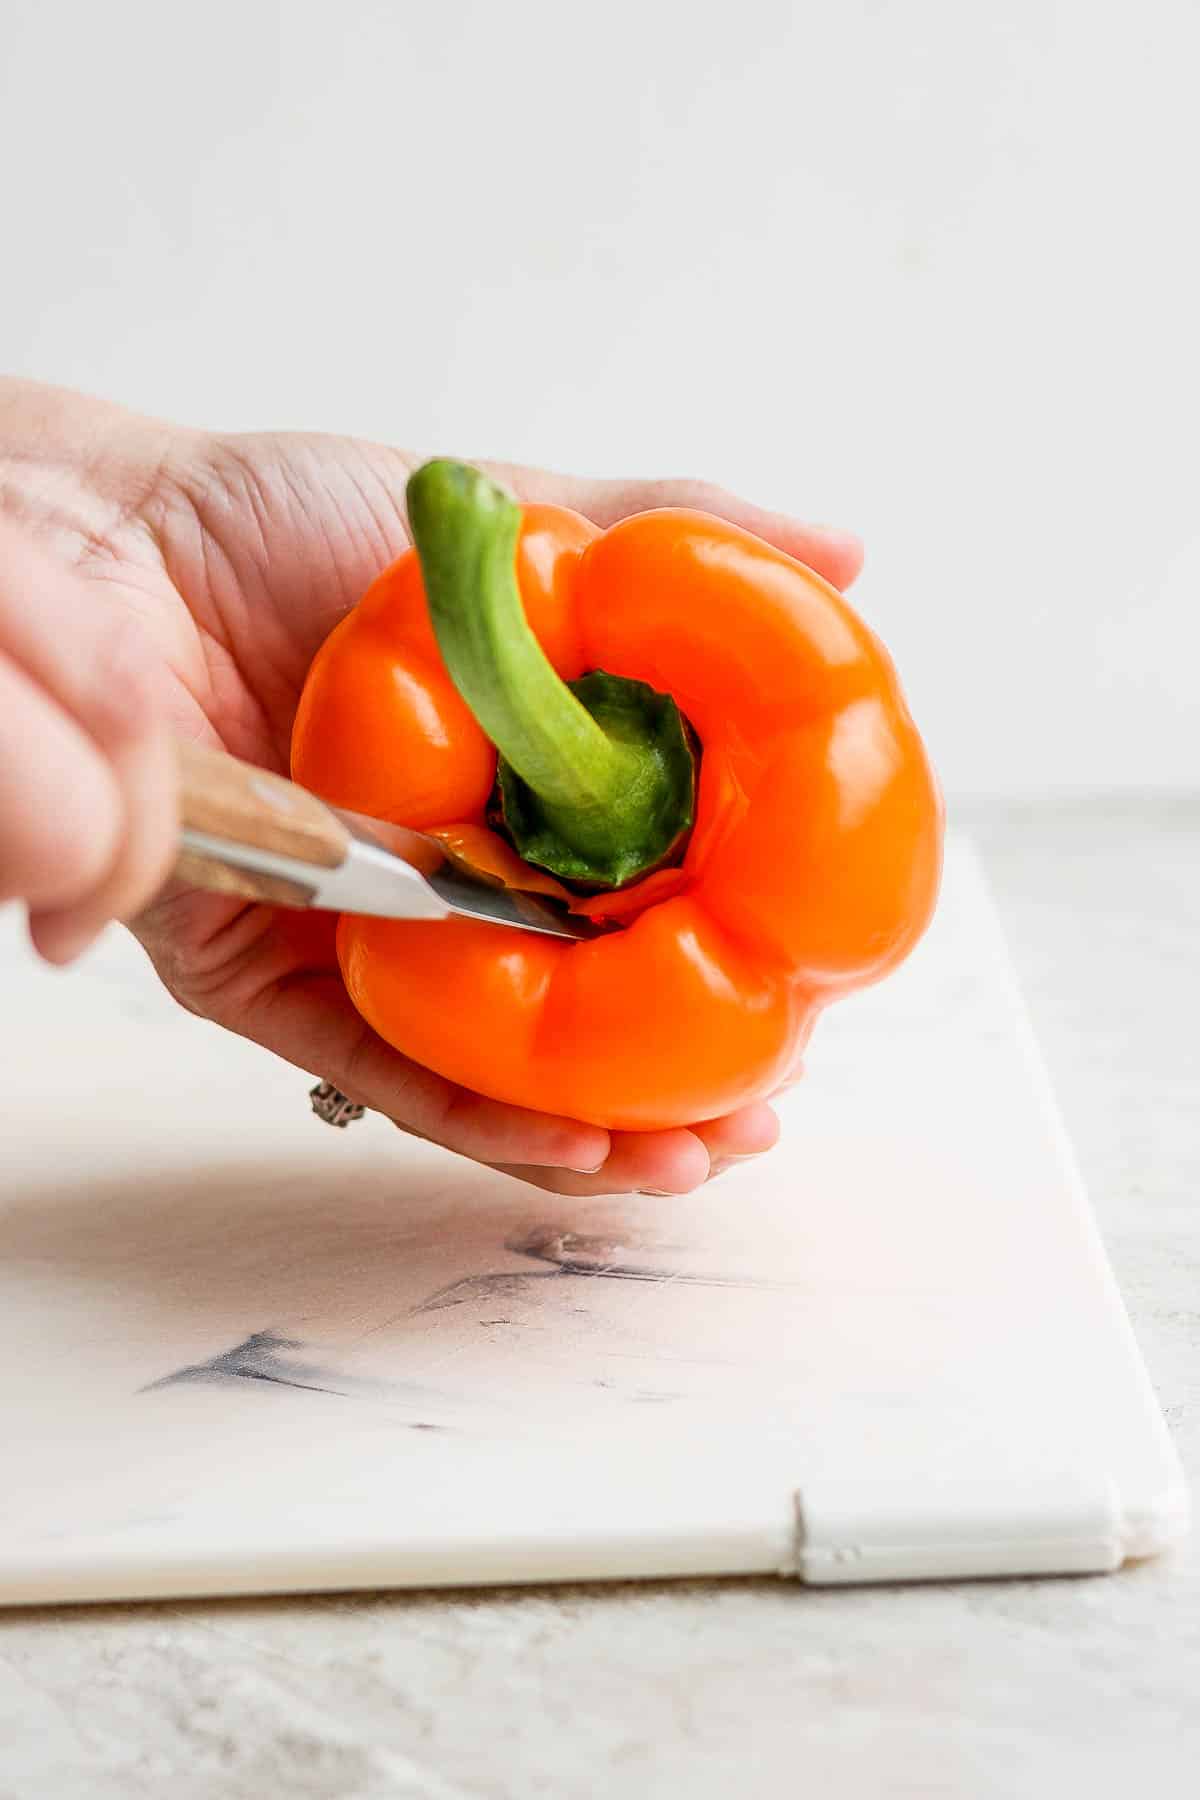 The top of the pepper being cut out with a paring knife.